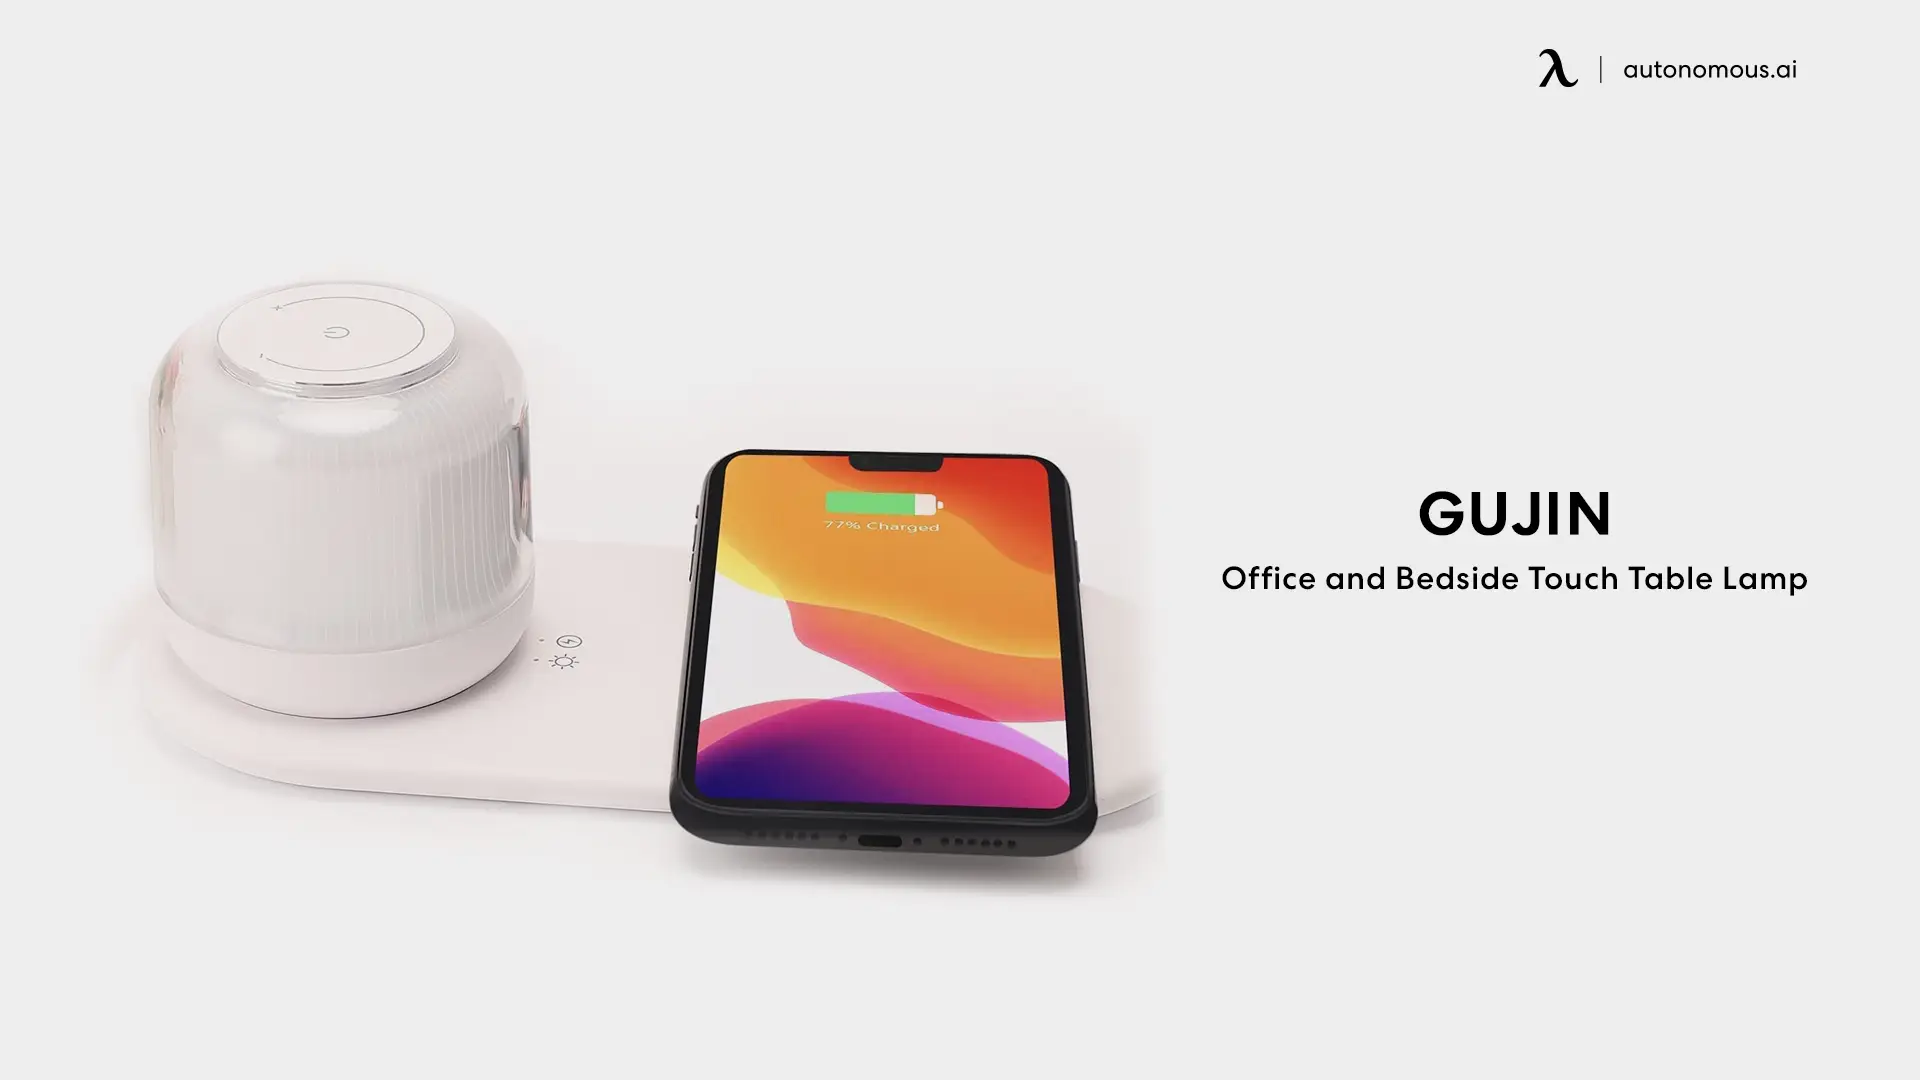 GUJIN Office and Bedside Touch Table Lamp